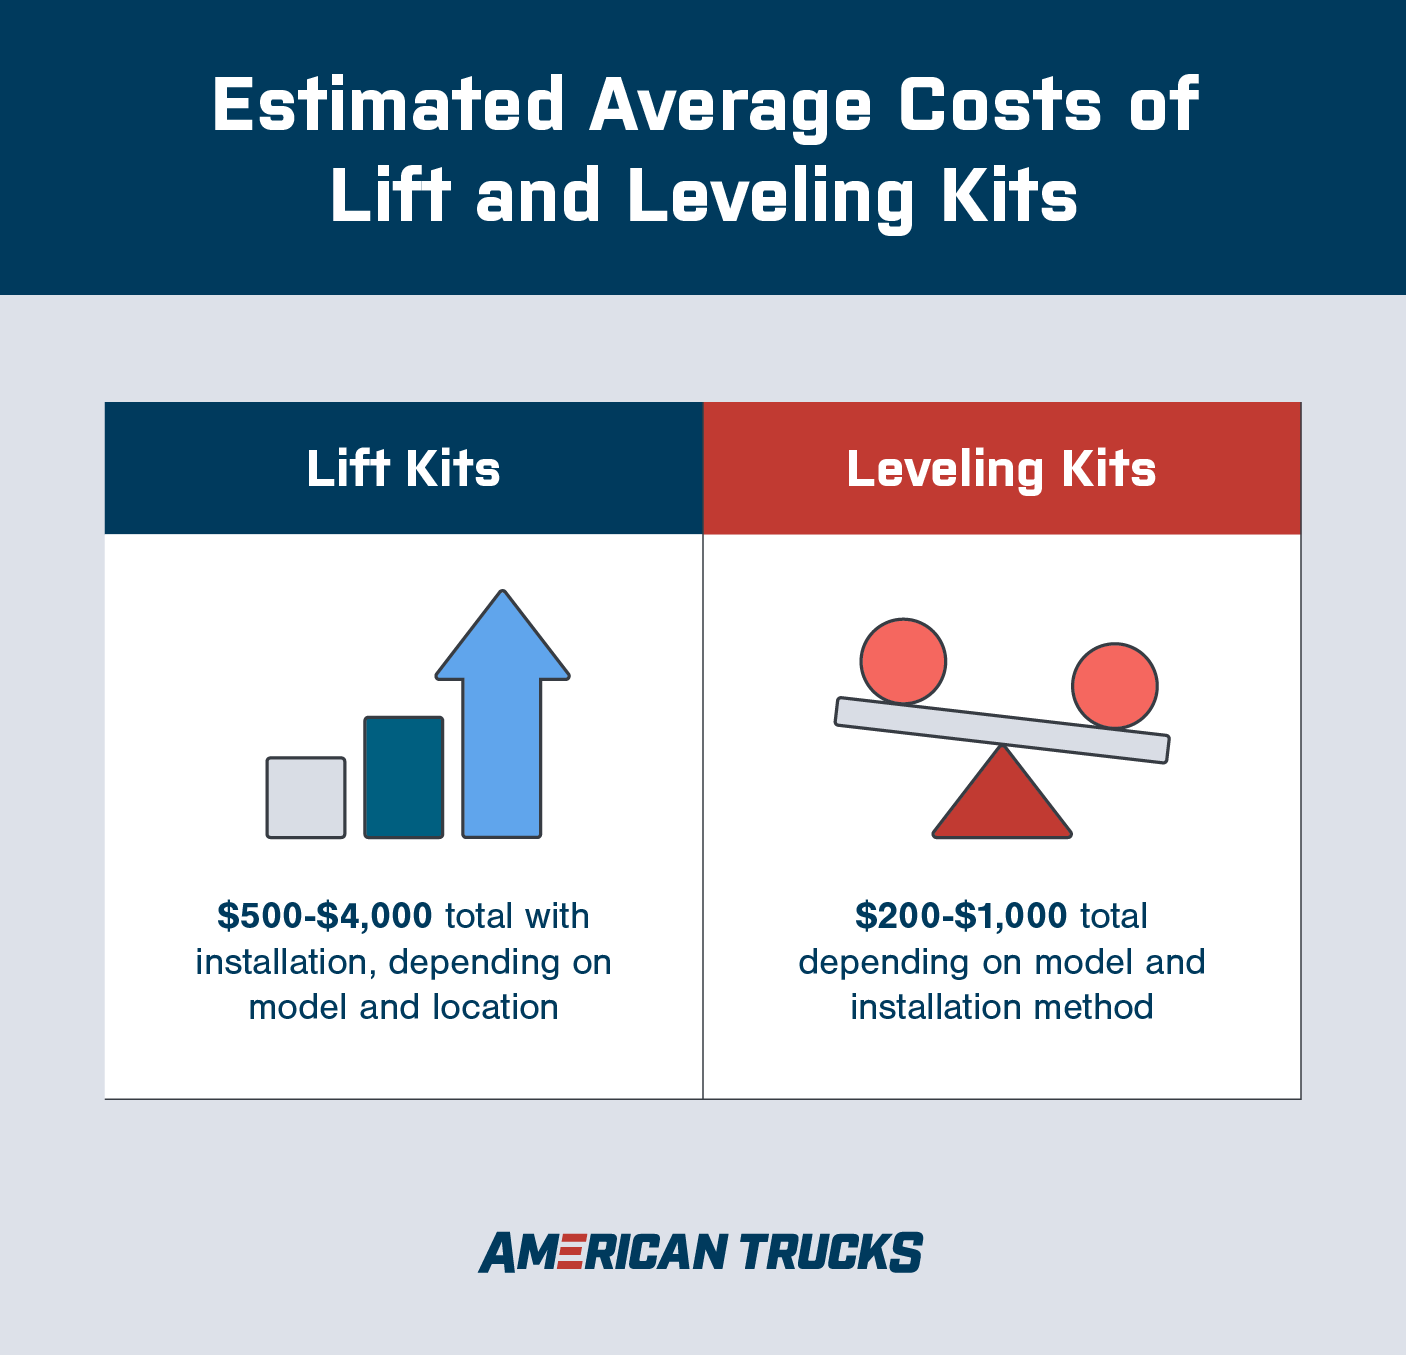 Estimated average cost of lift kits chart showing $500-$4000 for lift kits and $200-$1000 for leveling kits